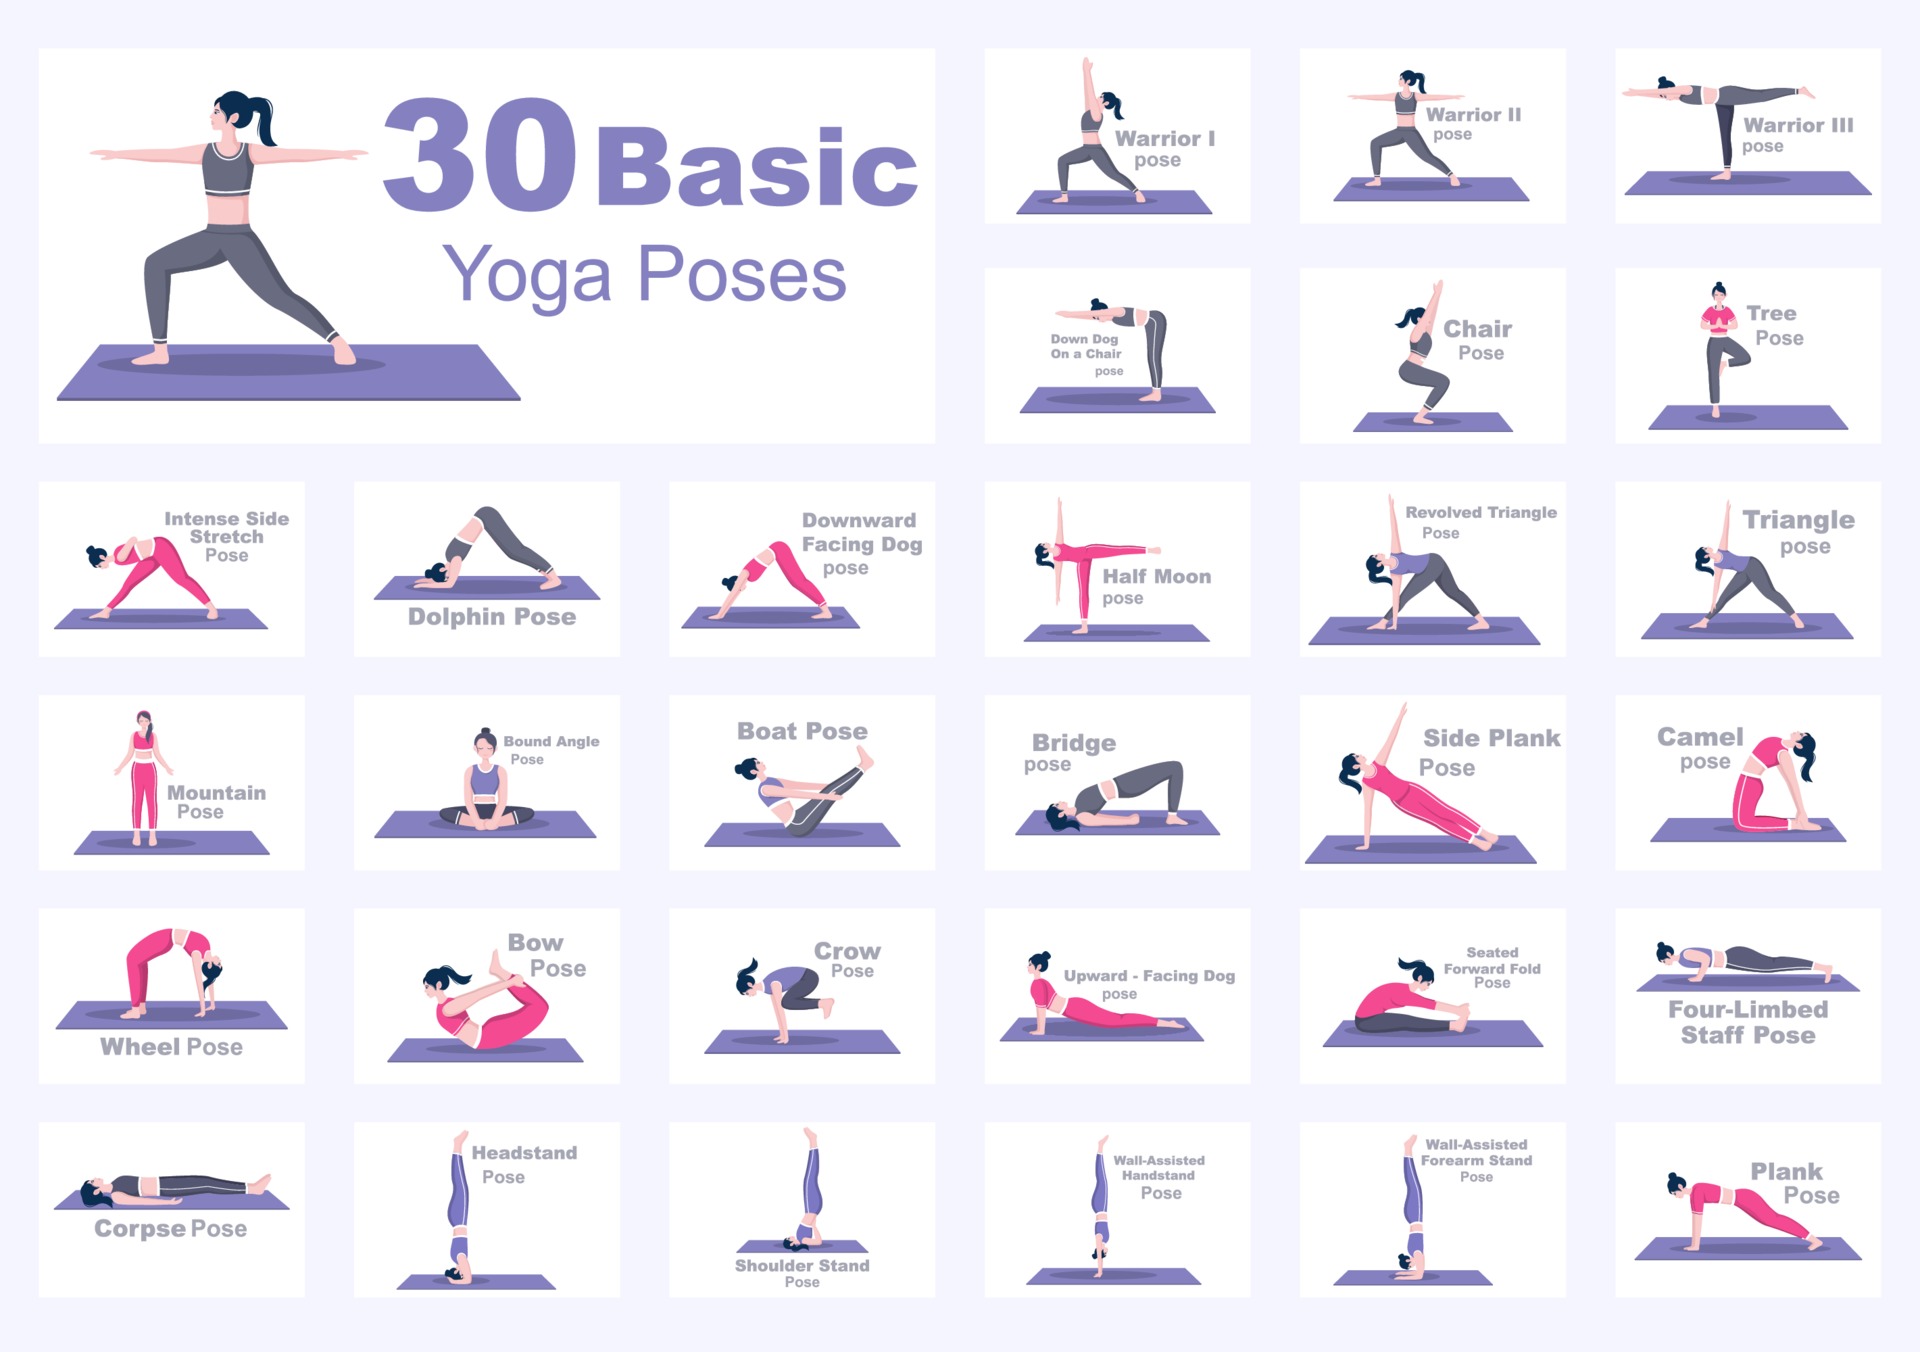 https://static.vecteezy.com/system/resources/previews/002/211/807/original/30-yoga-poses-and-fitness-exercises-illustration-vector.jpg